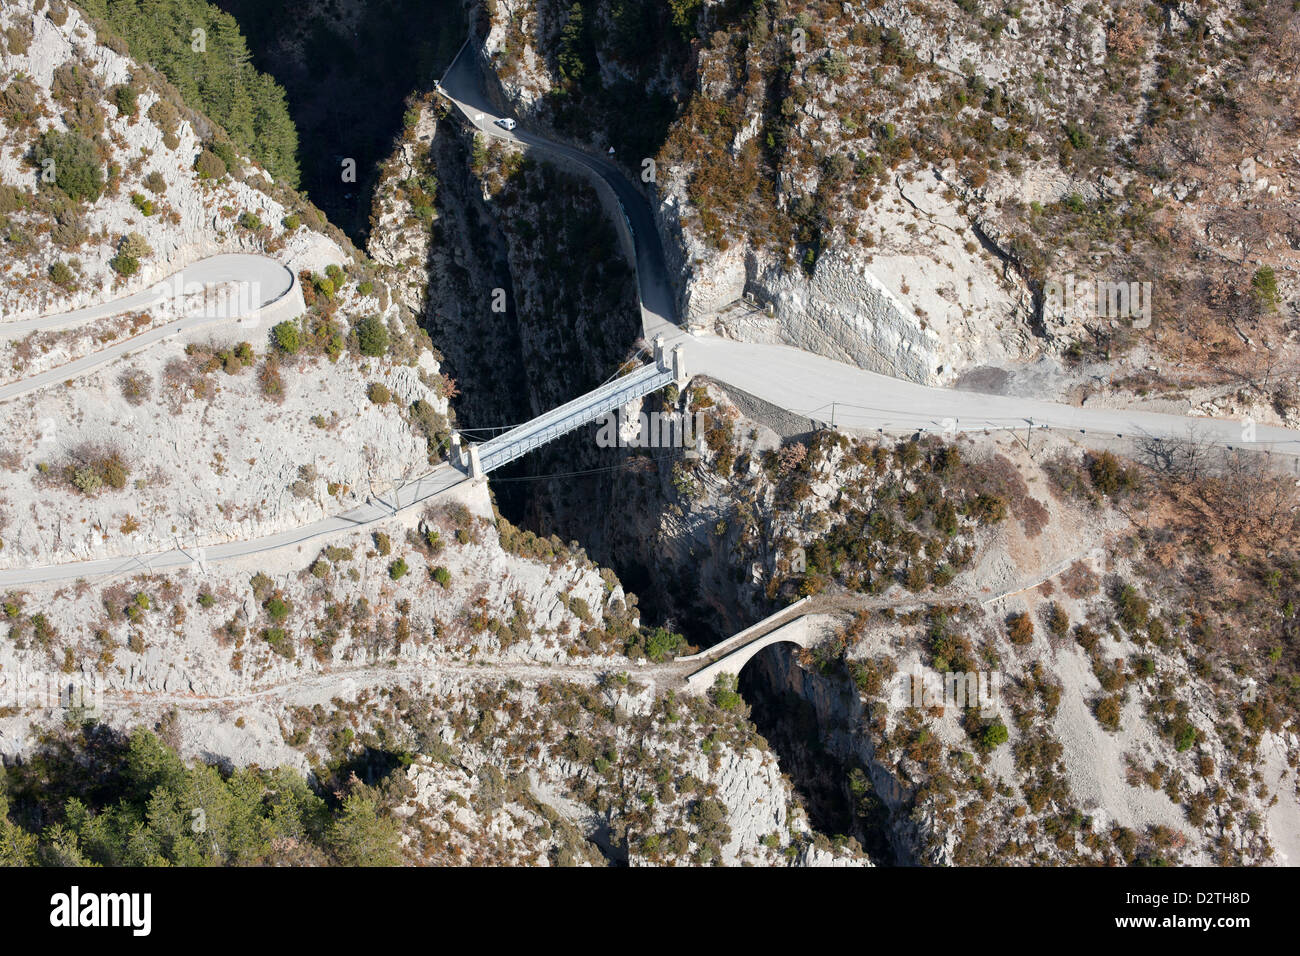 AERIAL VIEW. Historic and modern bridges over a deep canyon (height: approximately 90m). La Croix-sur-Roudoule, French Riviera's backcountry, France. Stock Photo